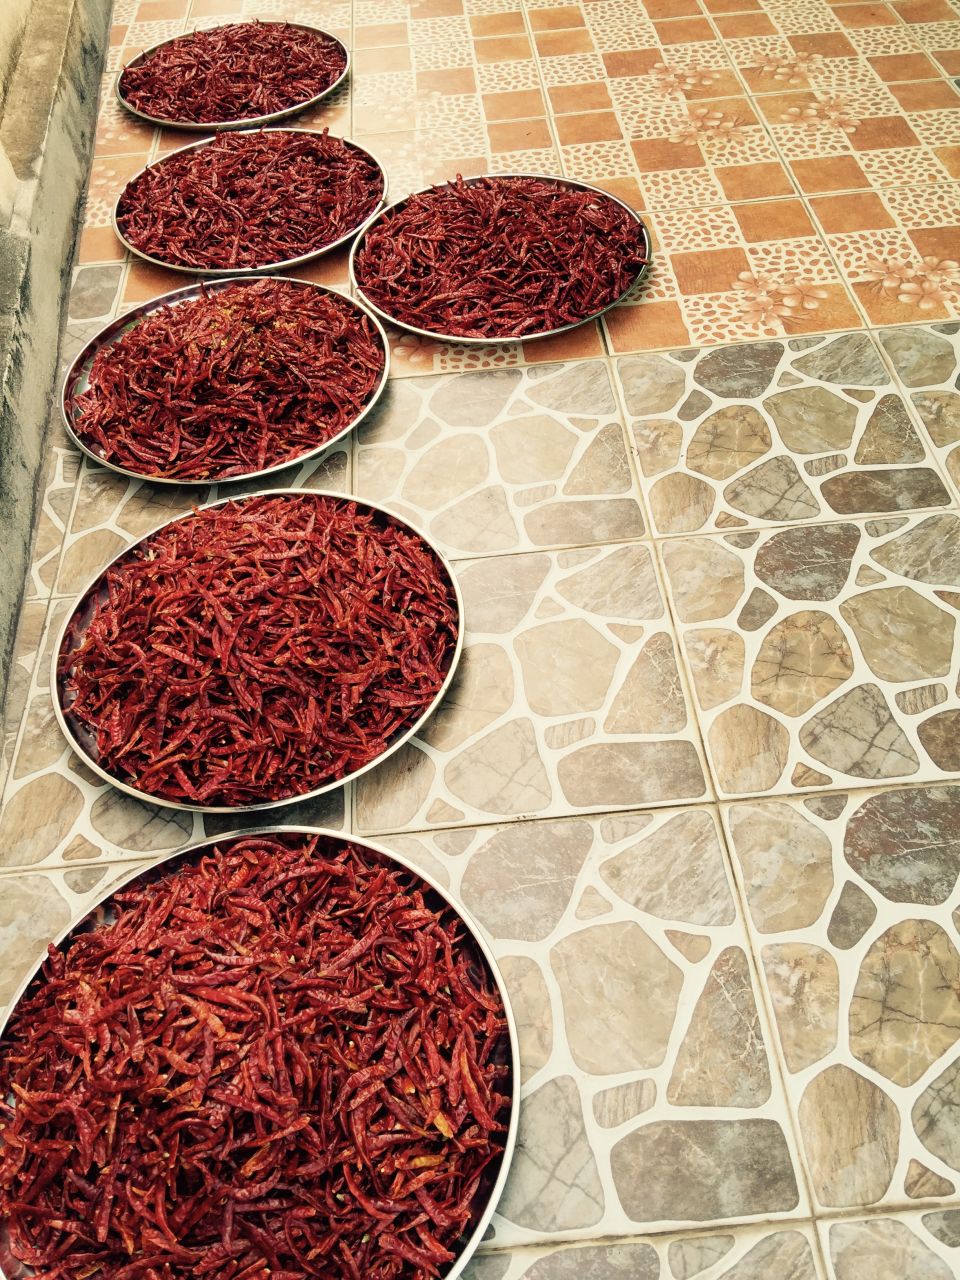 Drying chili in Thailand